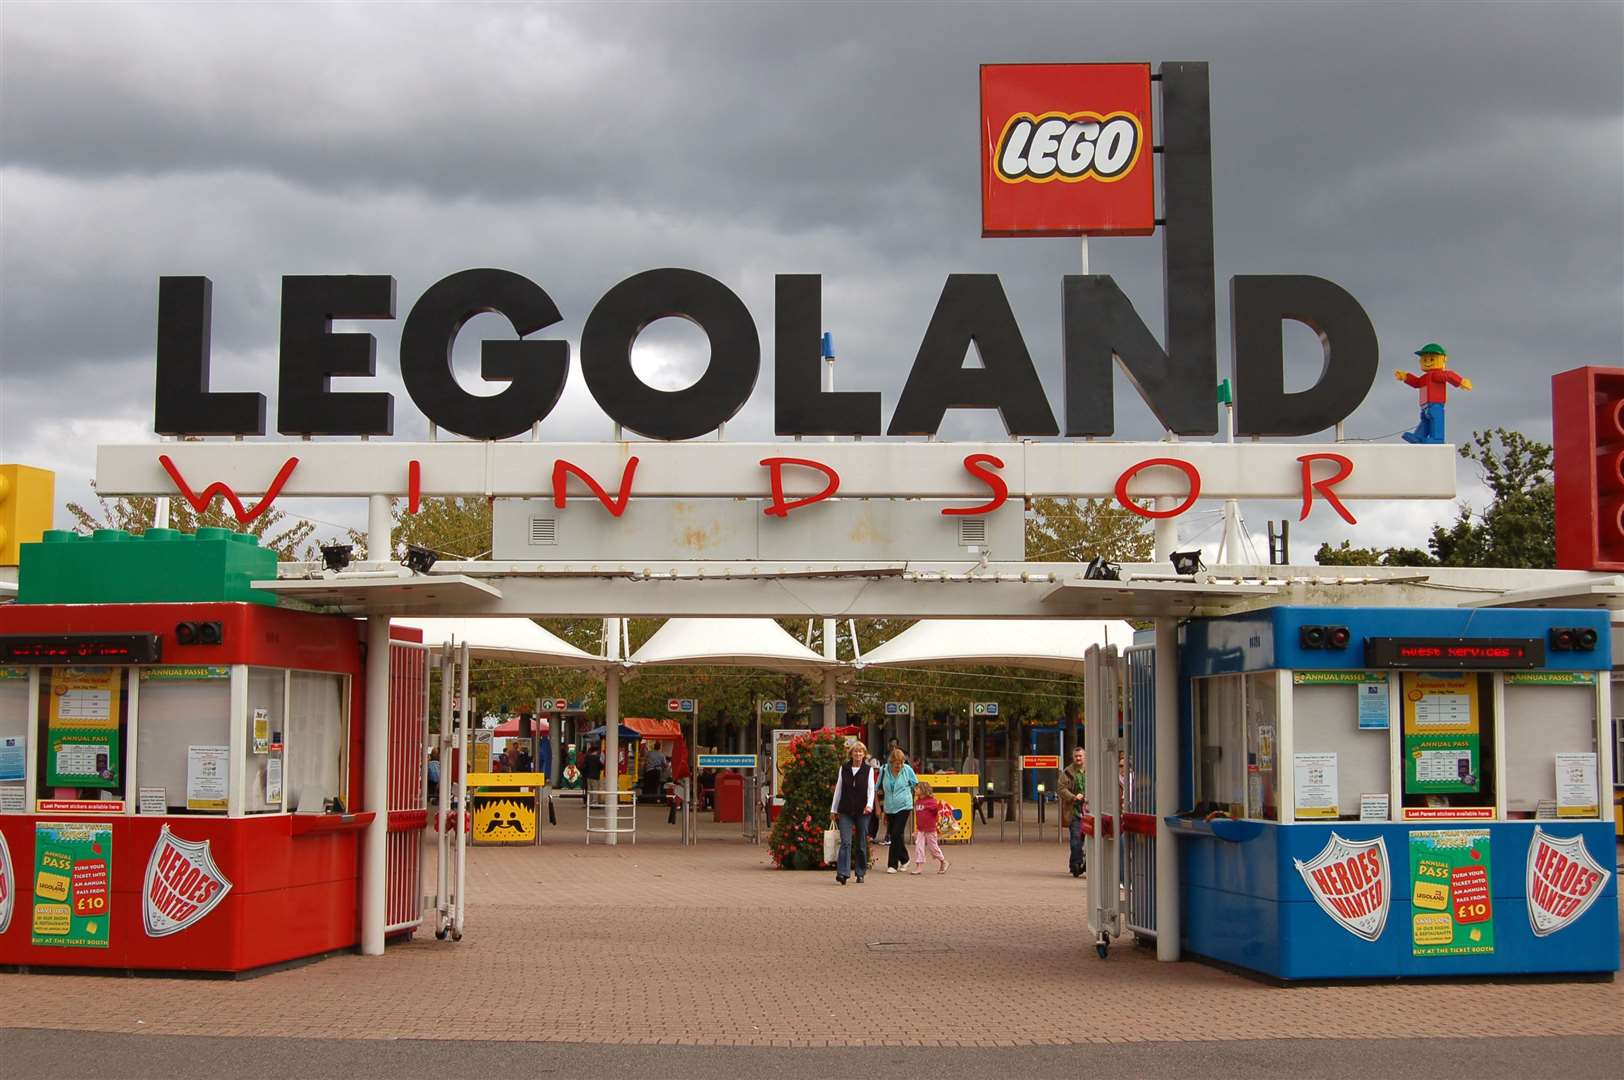 Merlin Entertainments, which runs many UK theme parks and attractions including Legoland, says people with coronavirus can contact the park and rearrange their booking